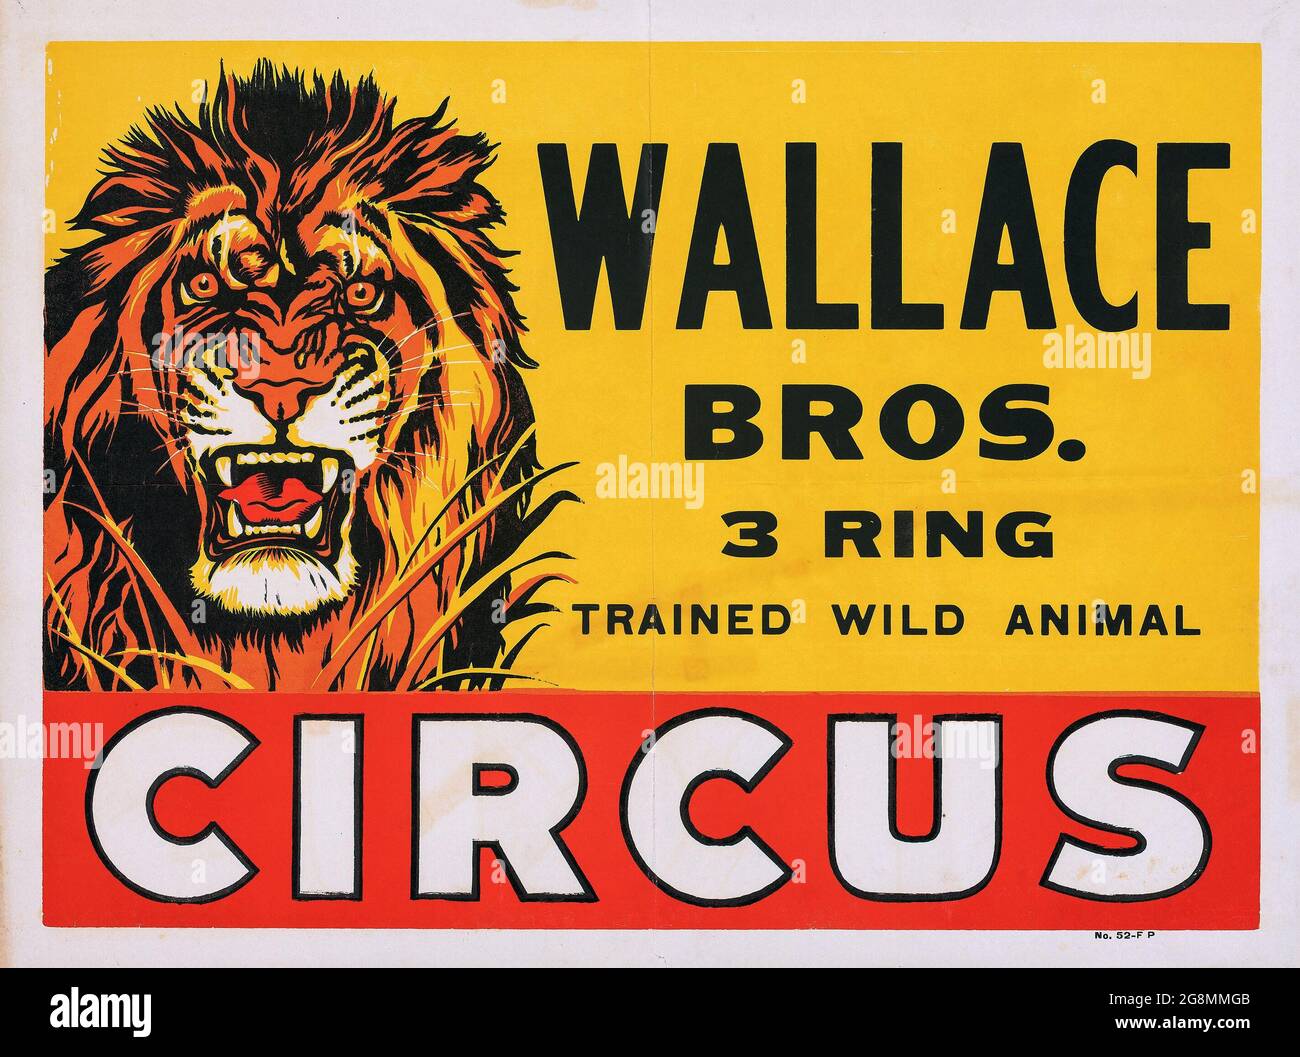 Wallace Brothers Circus Poster (1950s). 3 ring, trained wild animal Circus. Vintage Circus poster. A mighty lion roars. Stock Photo